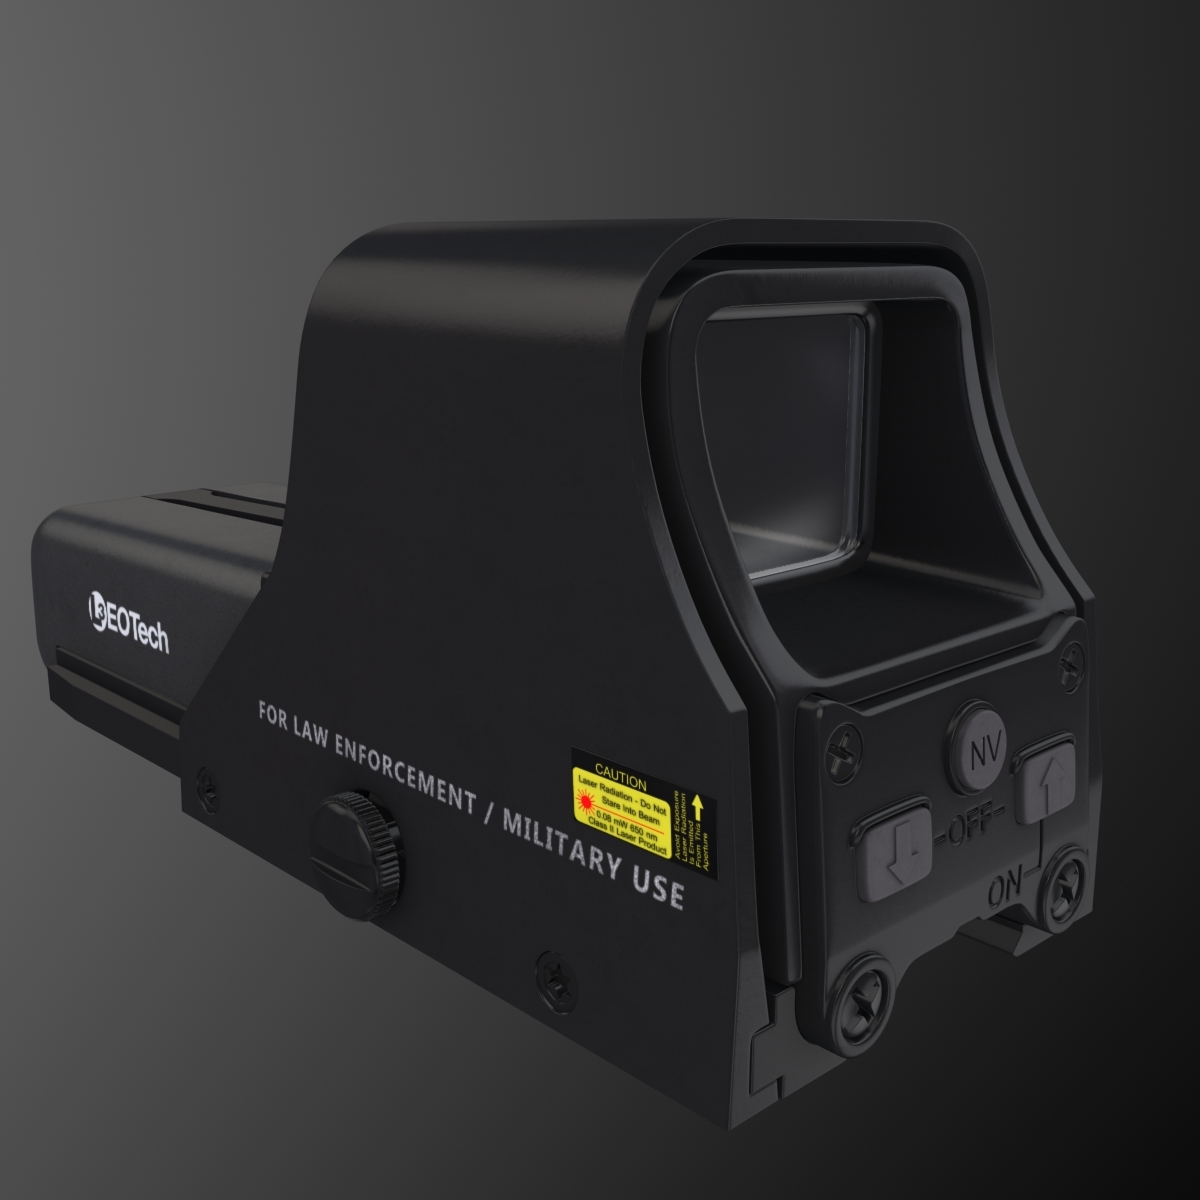 Eotech 552 Holographic Sight